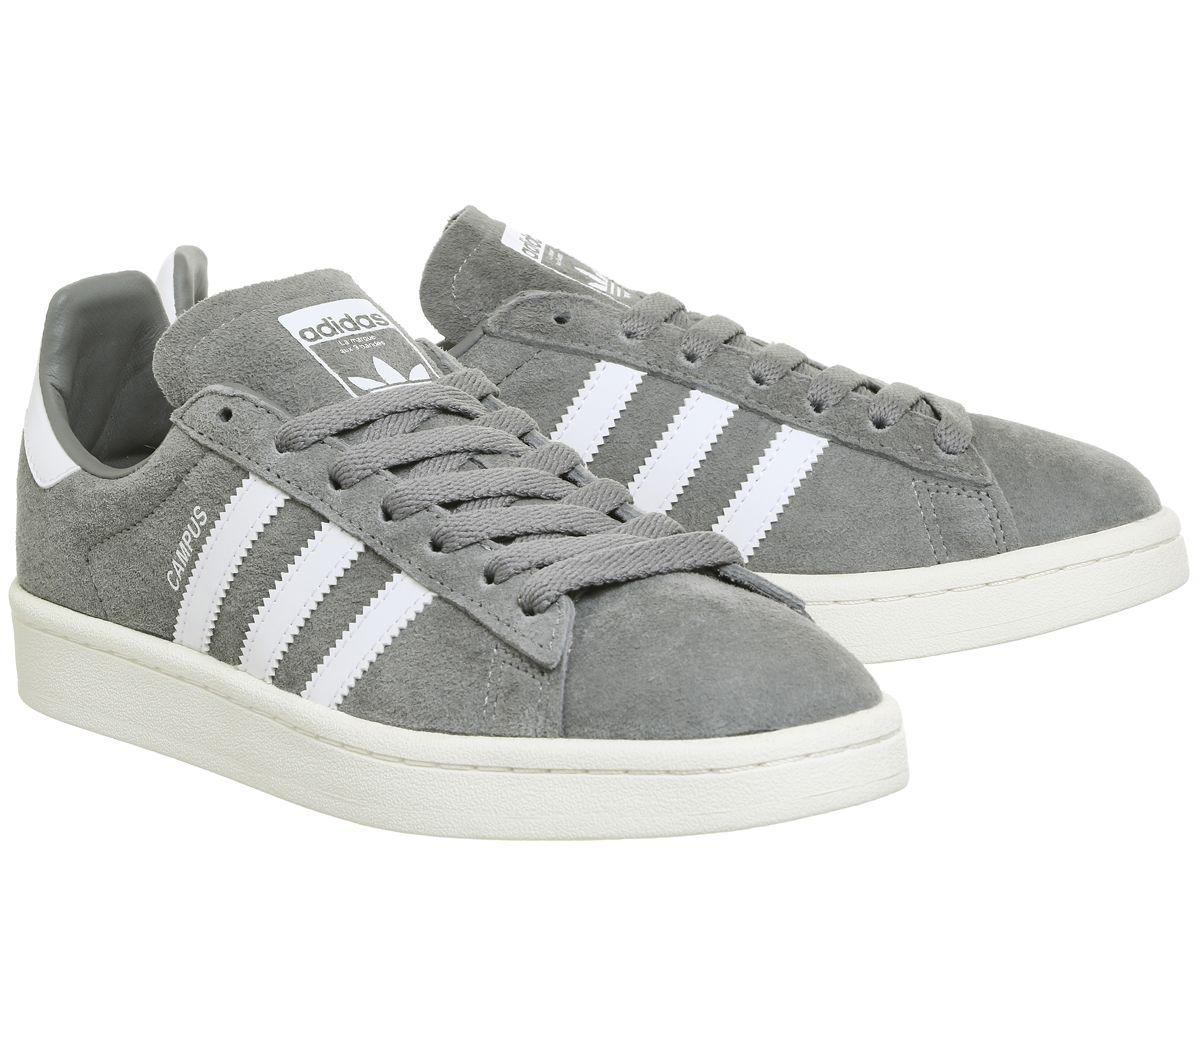 adidas Campus Suede Trainers in Grey Chalk White (Gray) - Save 84% - Lyst